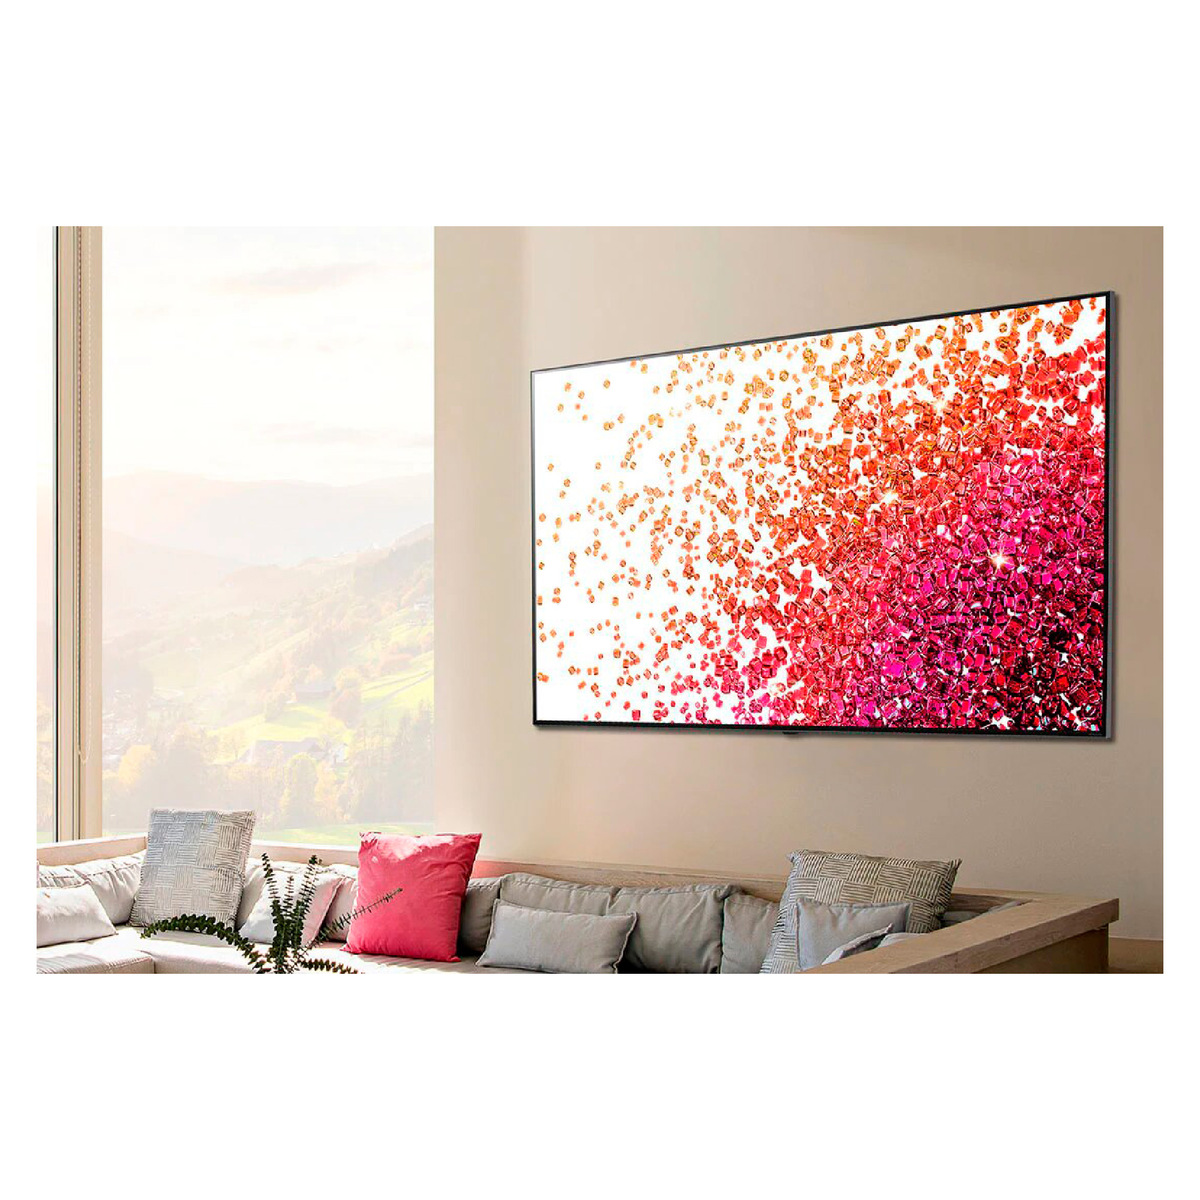 LG NanoCell TV 65 Inch NANO75 Series Cinema Screen Design, NEW 2021 4K Active HDR webOS Smart with ThinQ AI